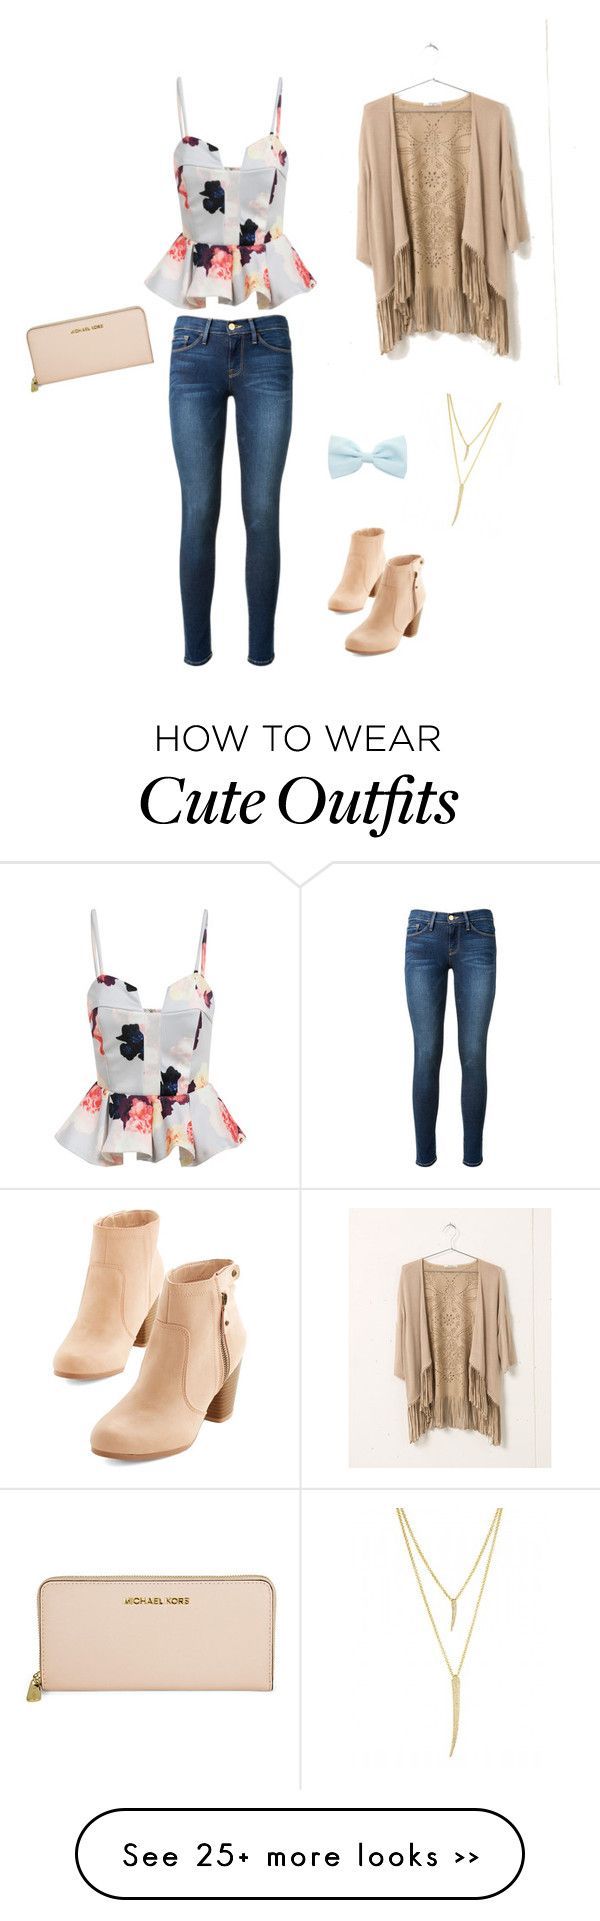 “Cute outfit I made” by shelbygarcia115 on Polyvore